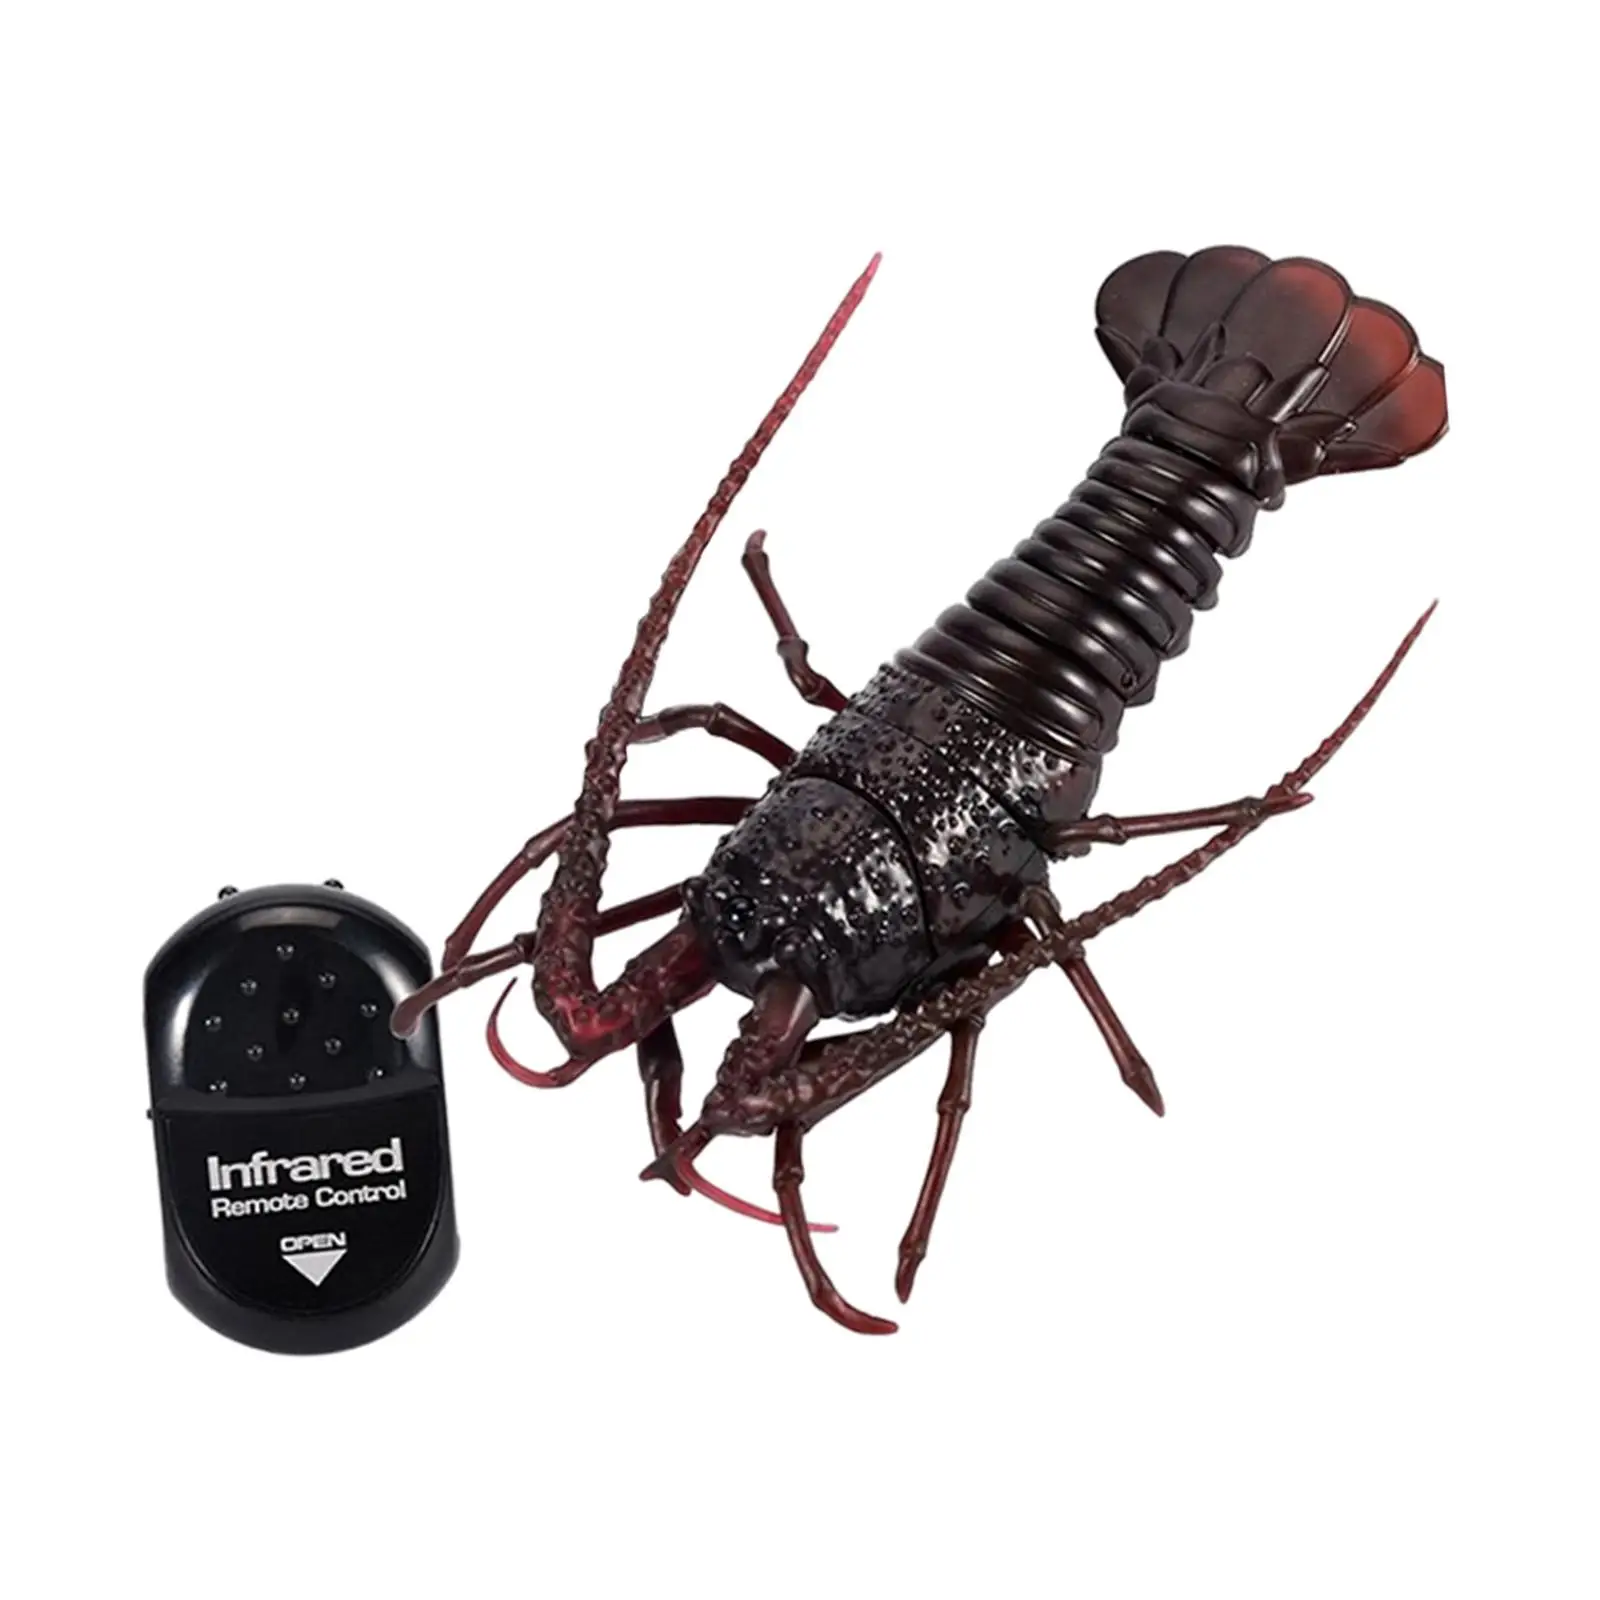 Remote Control Crawfish Toy Joke Toys Pet Model Vehicle Electric Infrared RC Shrimp for Kids Toddler Children Birthday Gifts